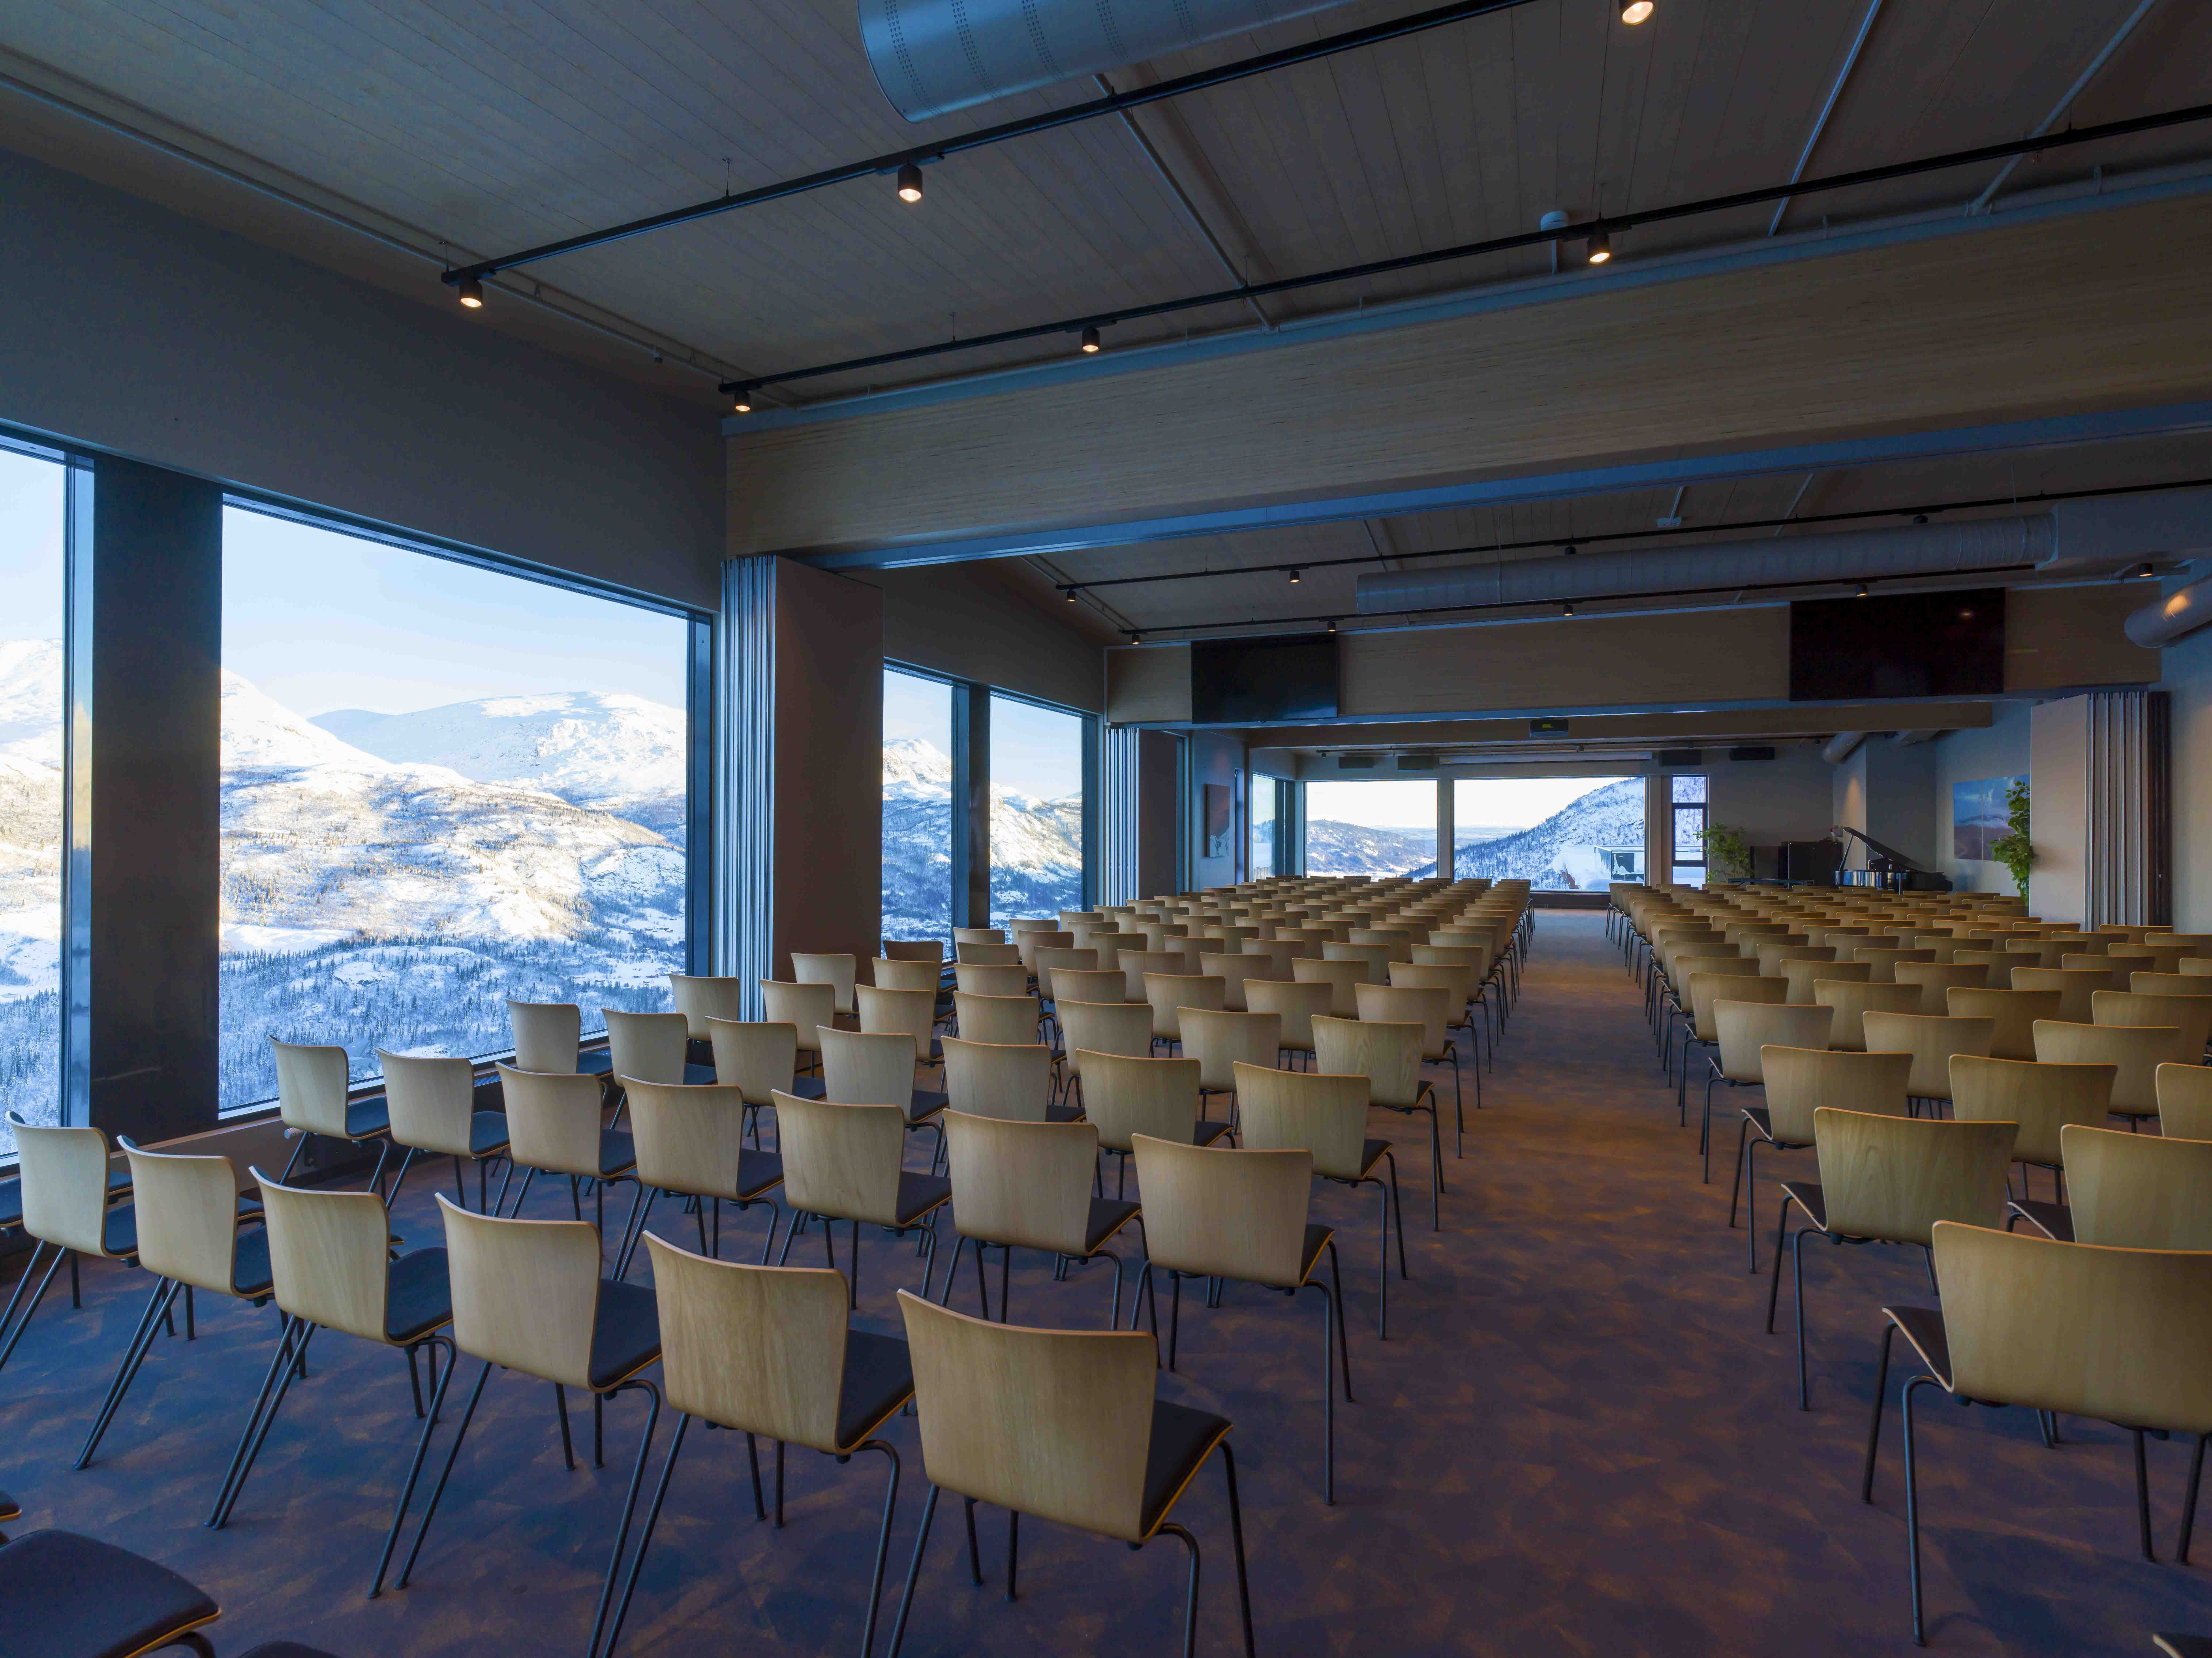 Skarsnute Hotell is the ideal place for courses, conferences, seminars and meetings